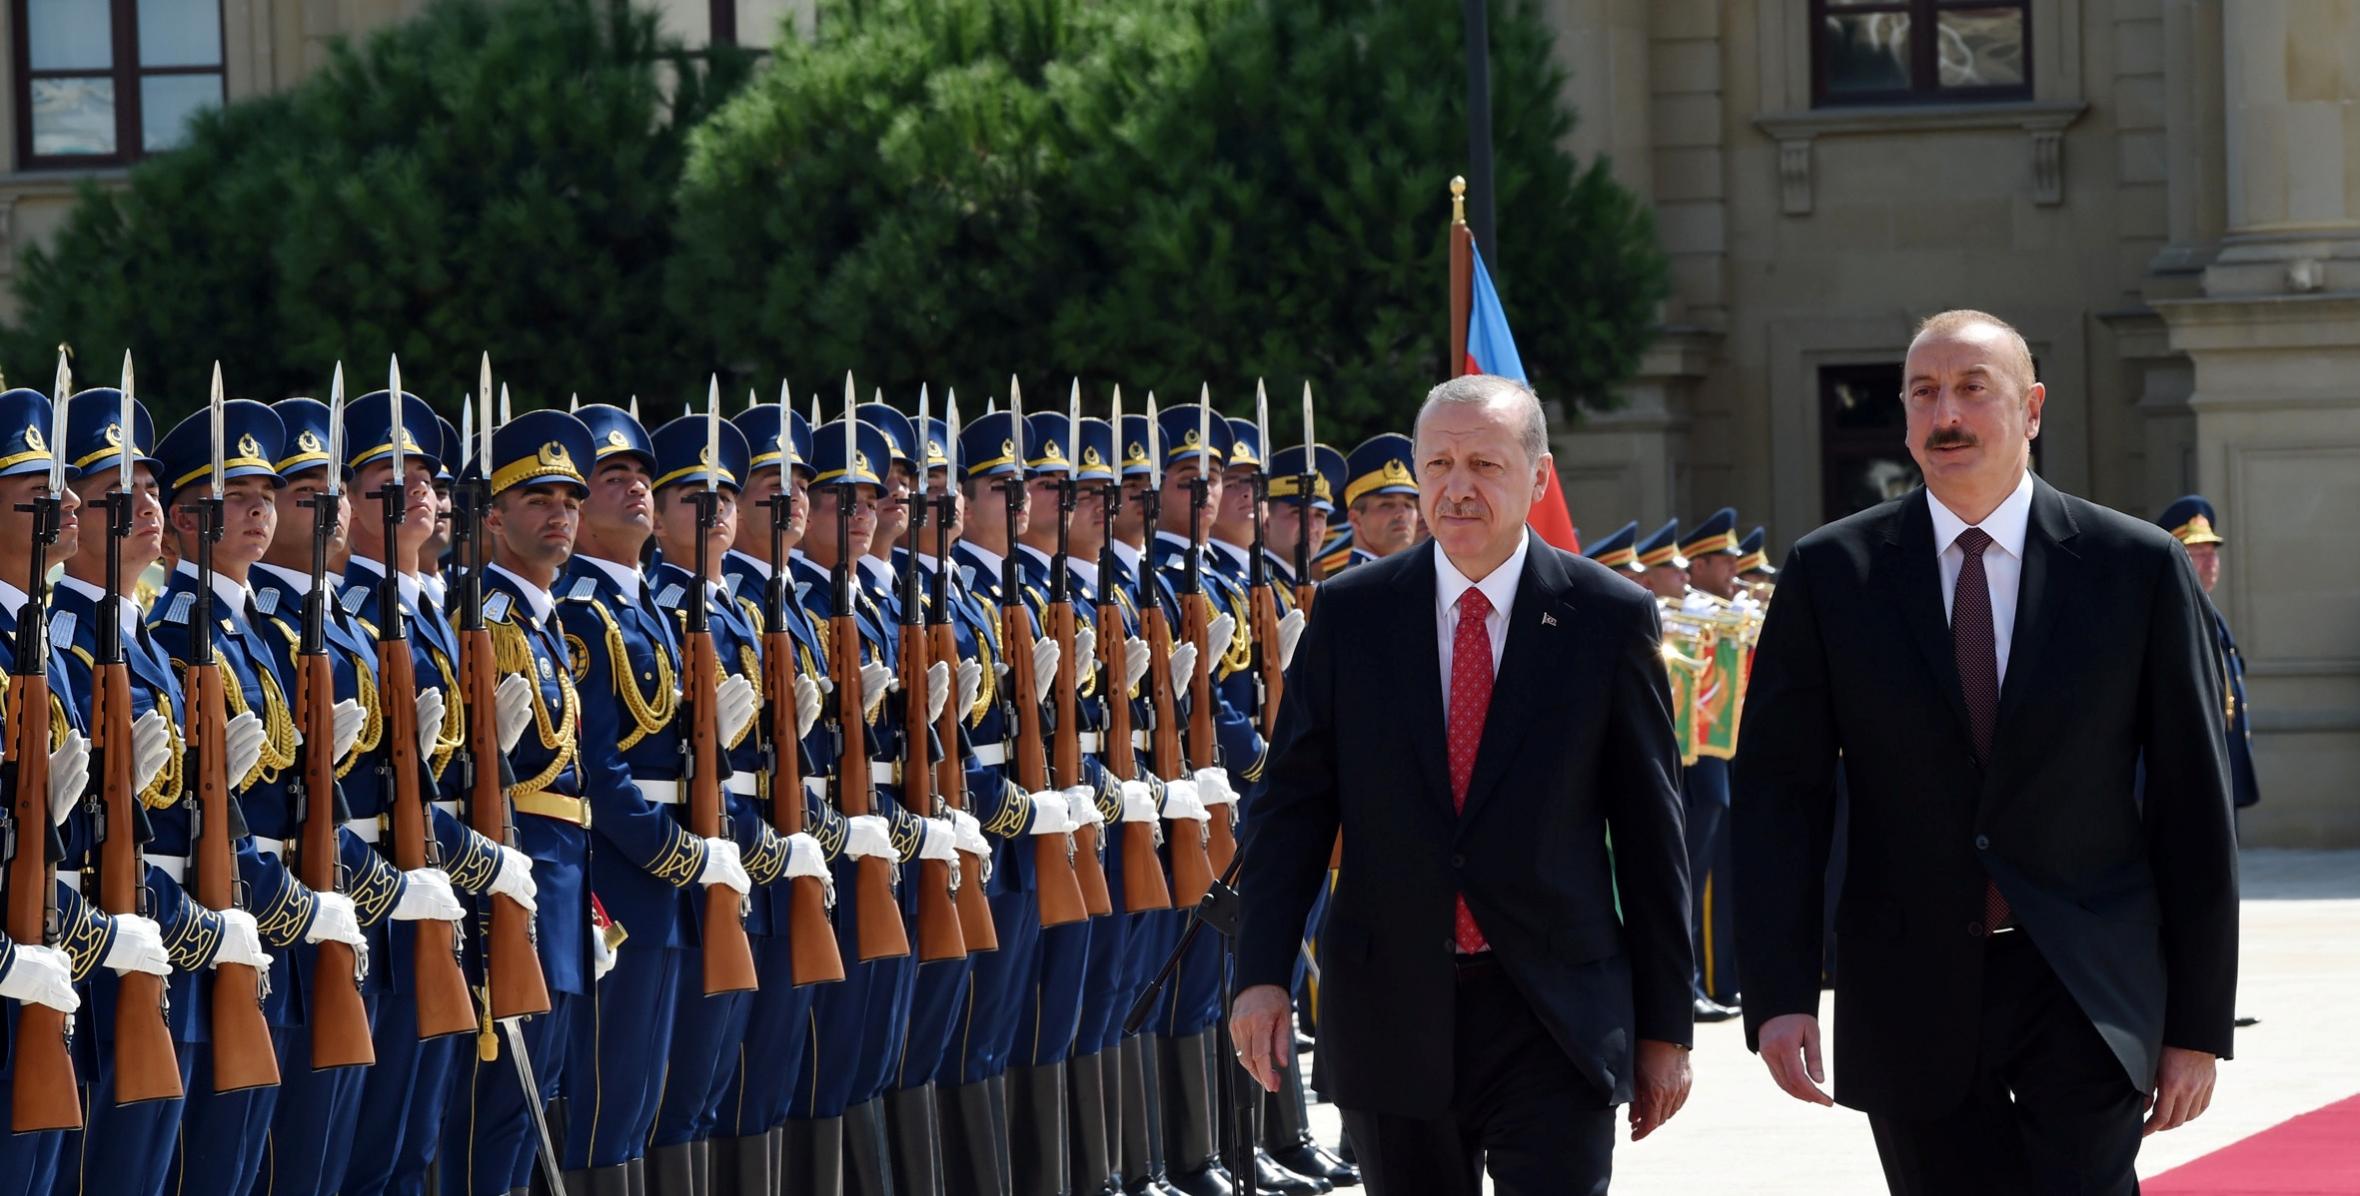 Official welcome ceremony was held for Turkish President Recep Tayyip Erdogan